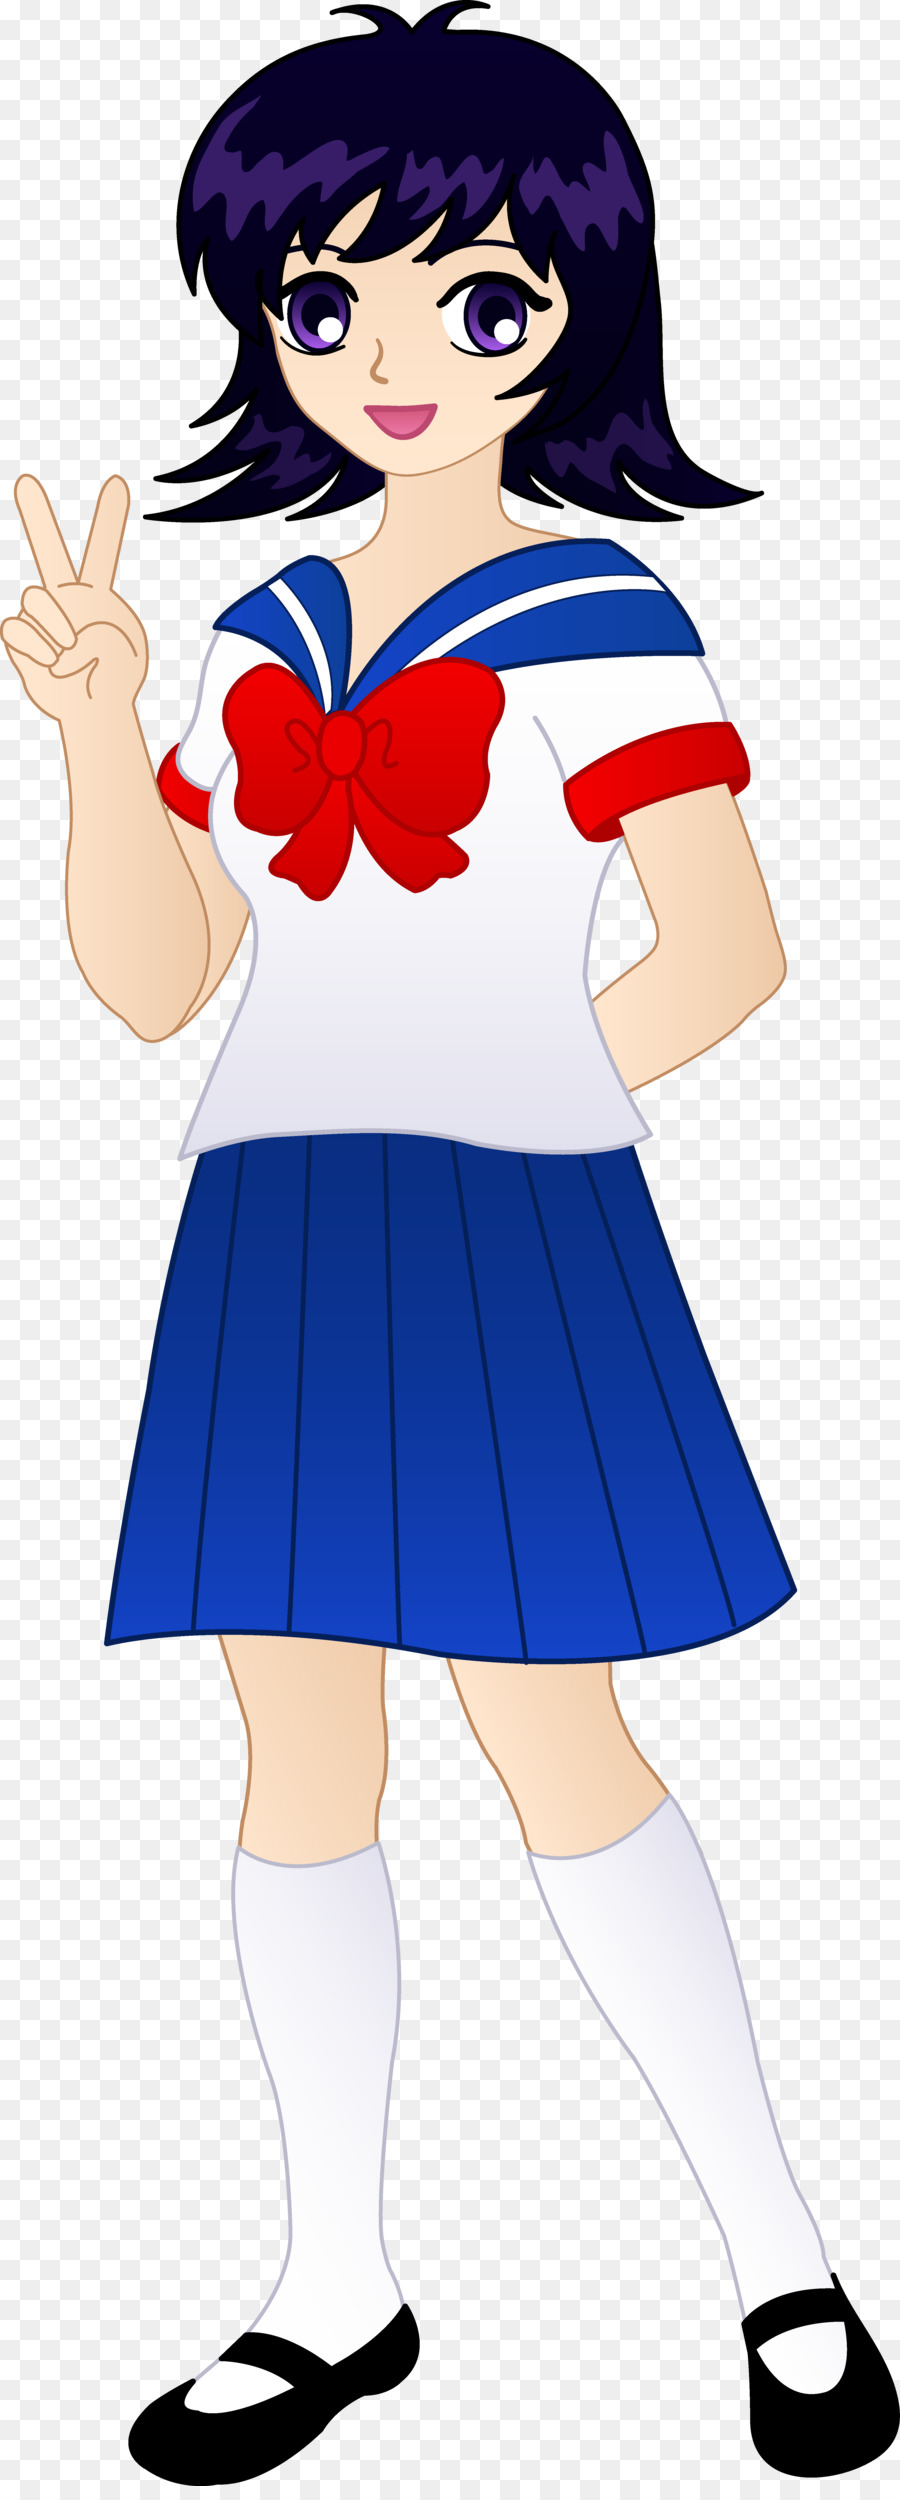 Student drawing girl clip. Anime clipart cute